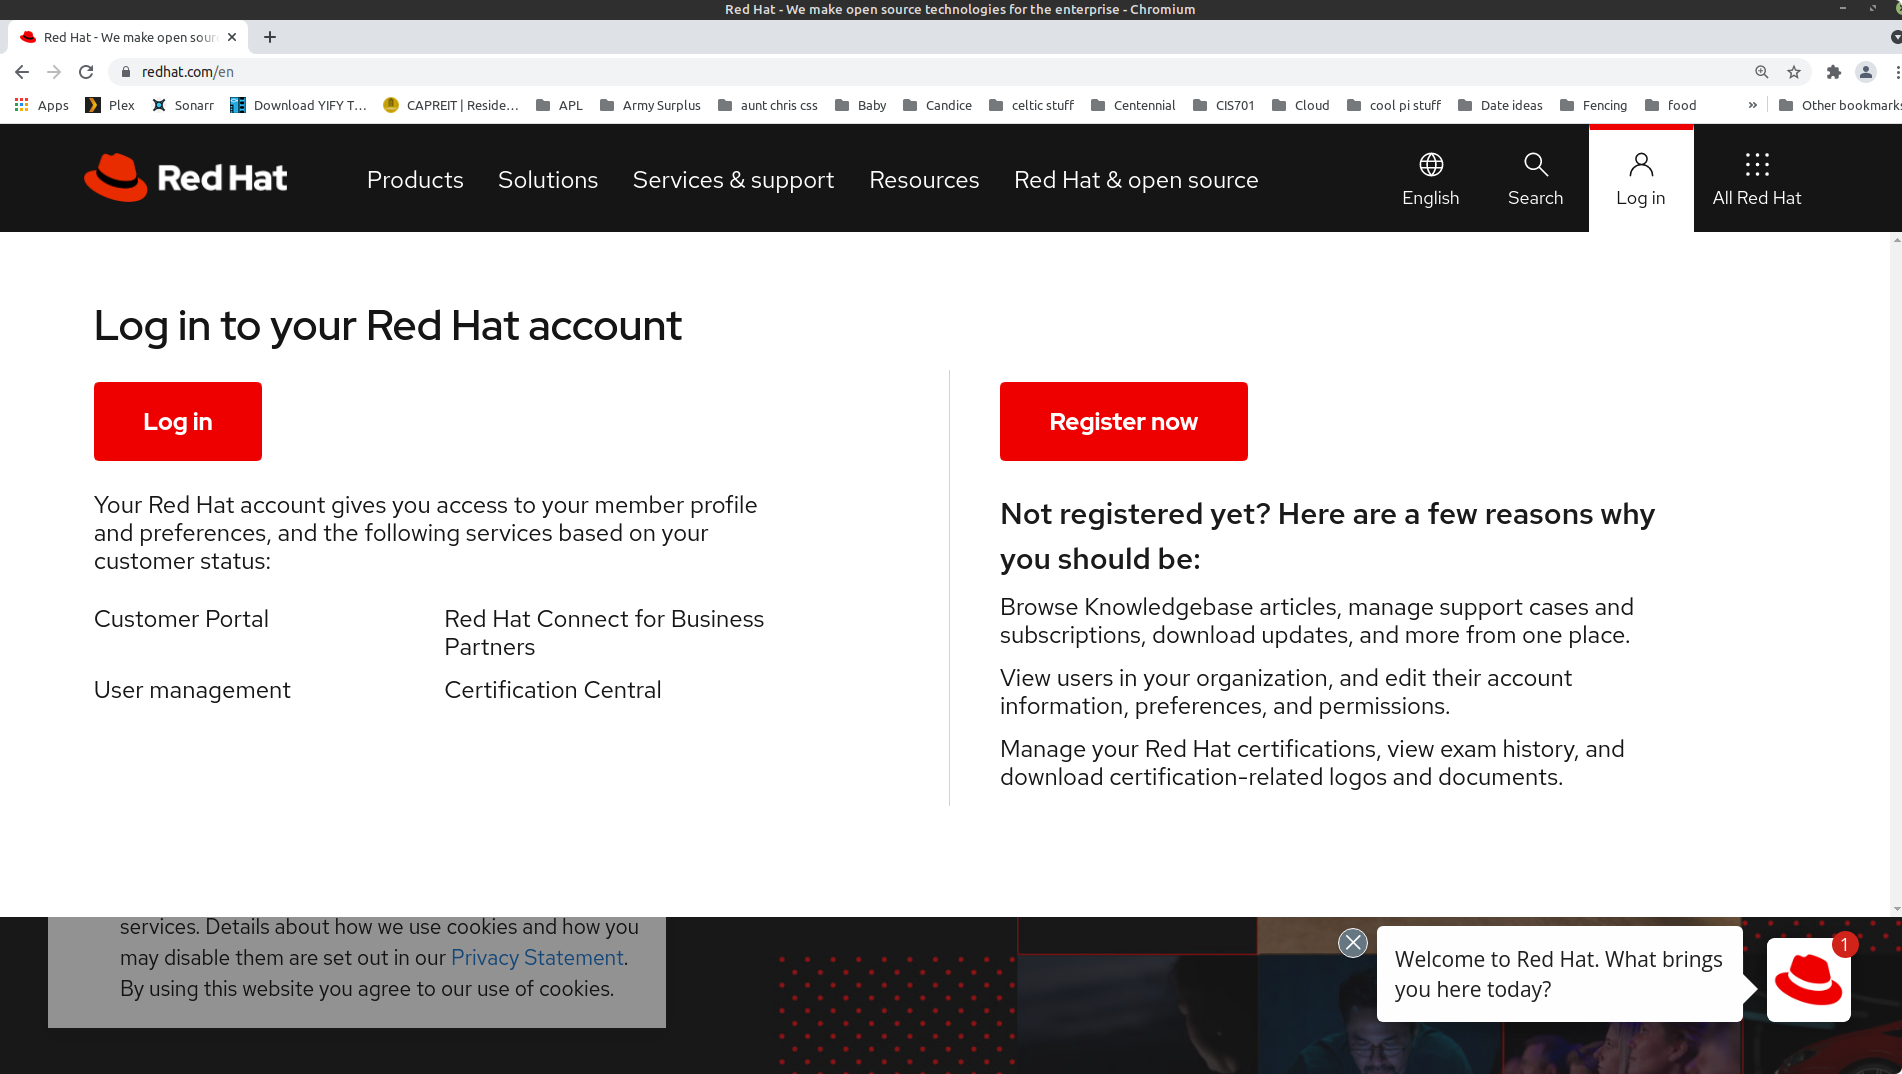 Registering for a Red Hat account.